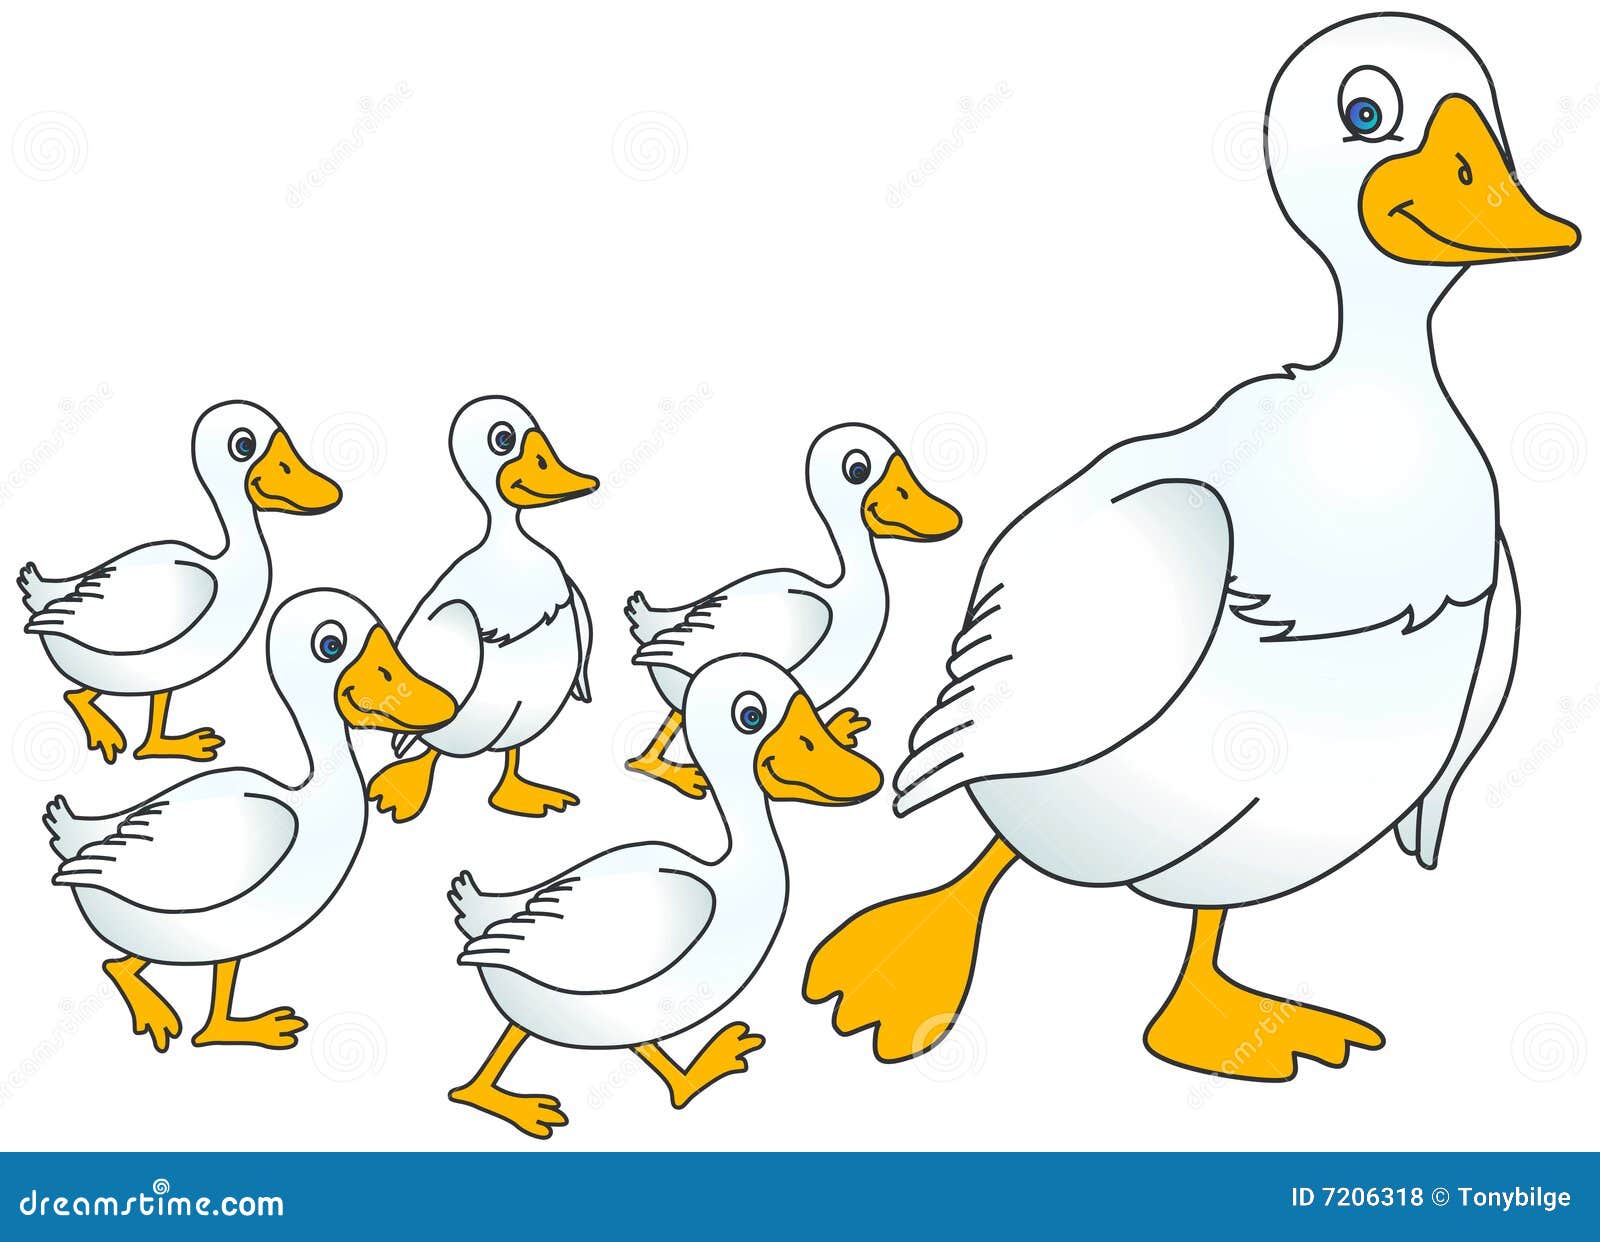 mother goose clipart images - photo #29